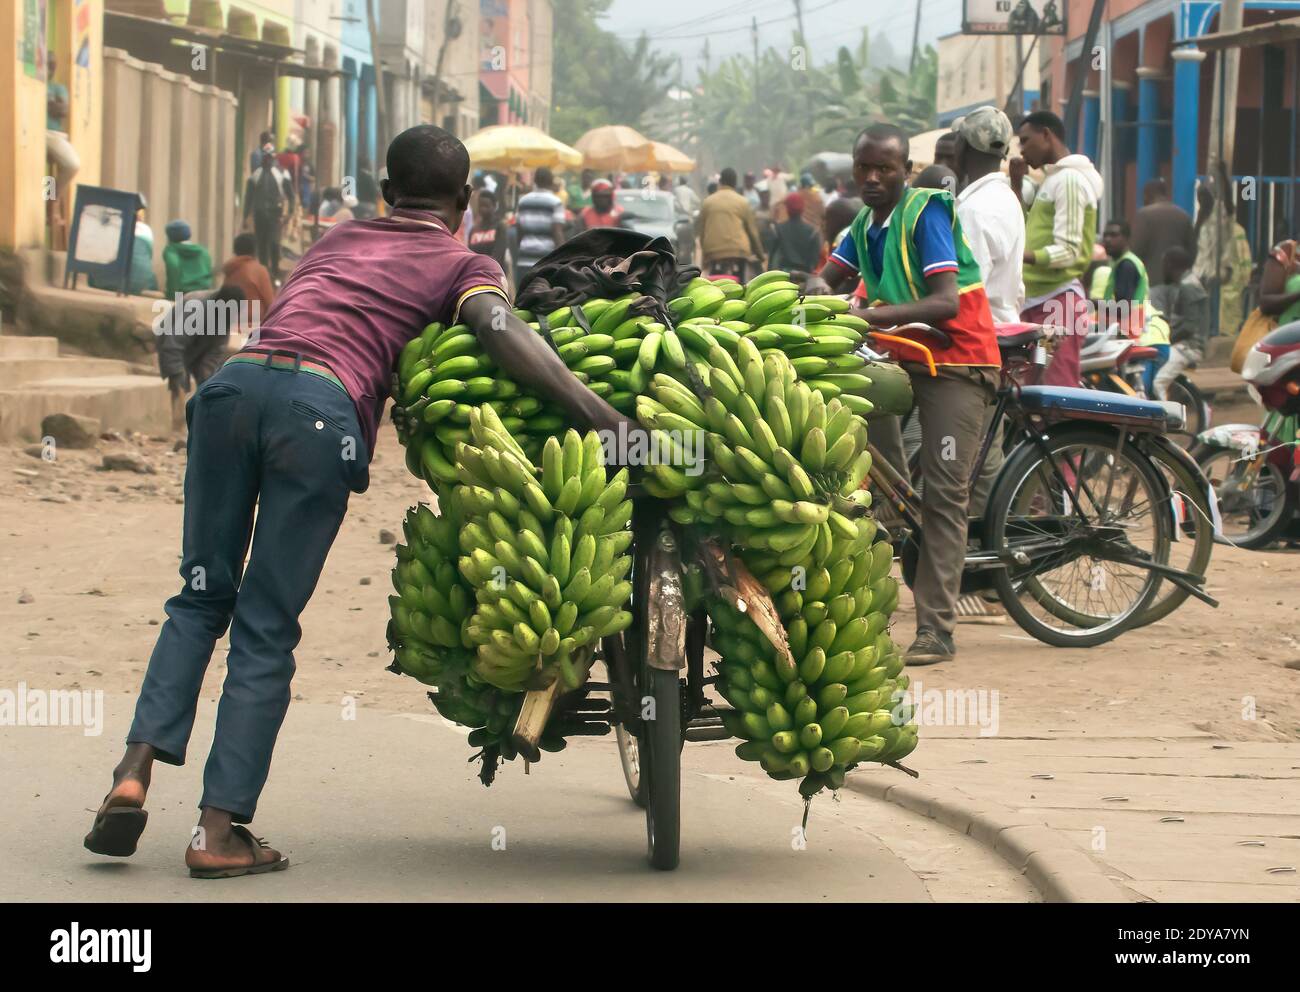 Carrying huge loads on bicycles in Goma, Democratic Republic of Congo Stock Photo